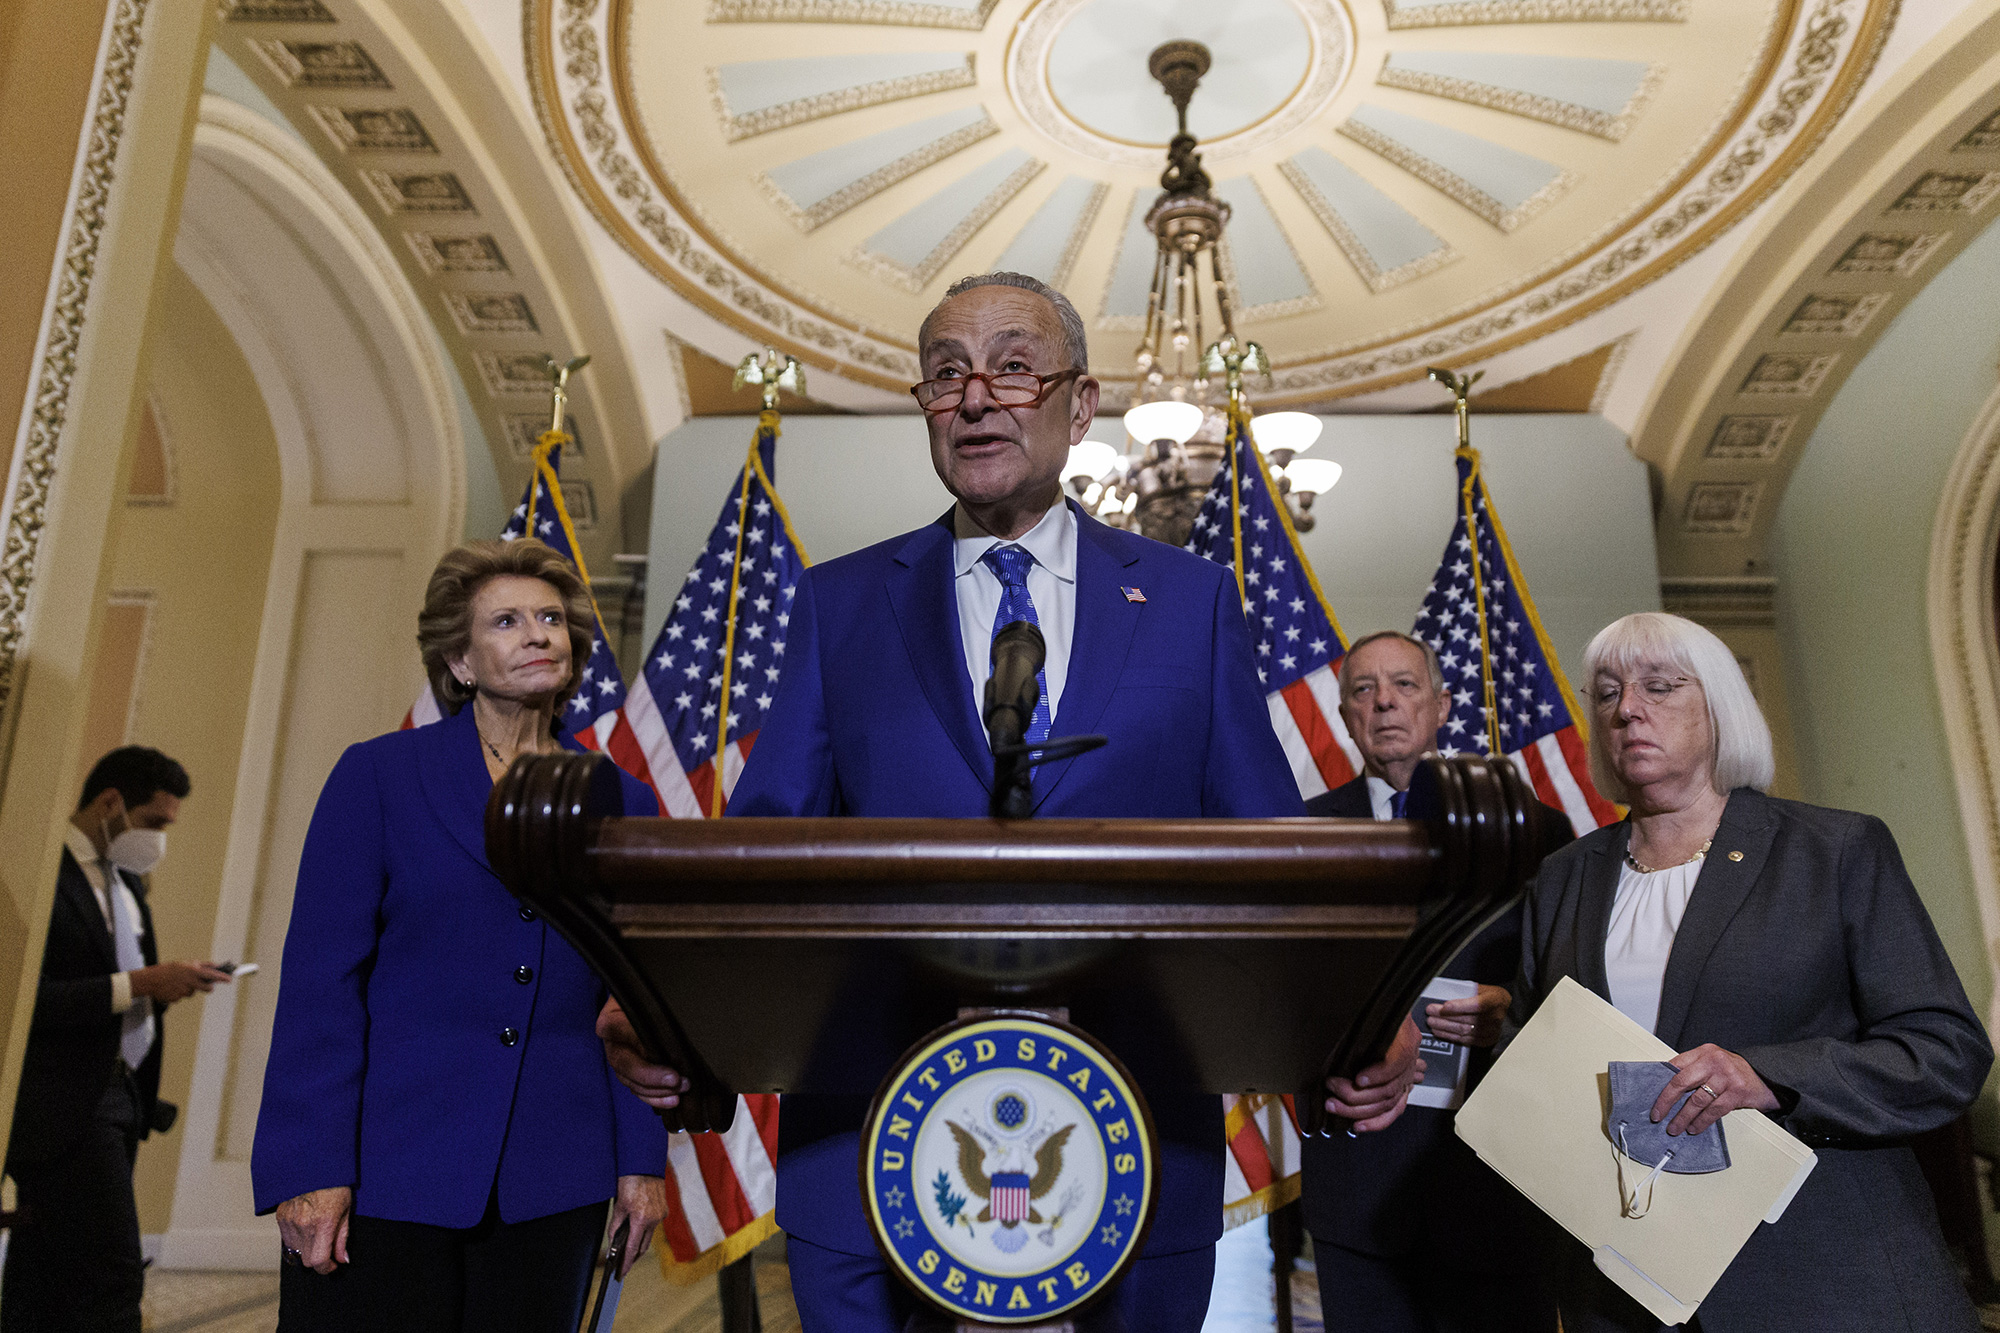 Senate Majority Leader Chuck Schumer speaks at the U.S. Capitol on Wednesday, June 22nd.